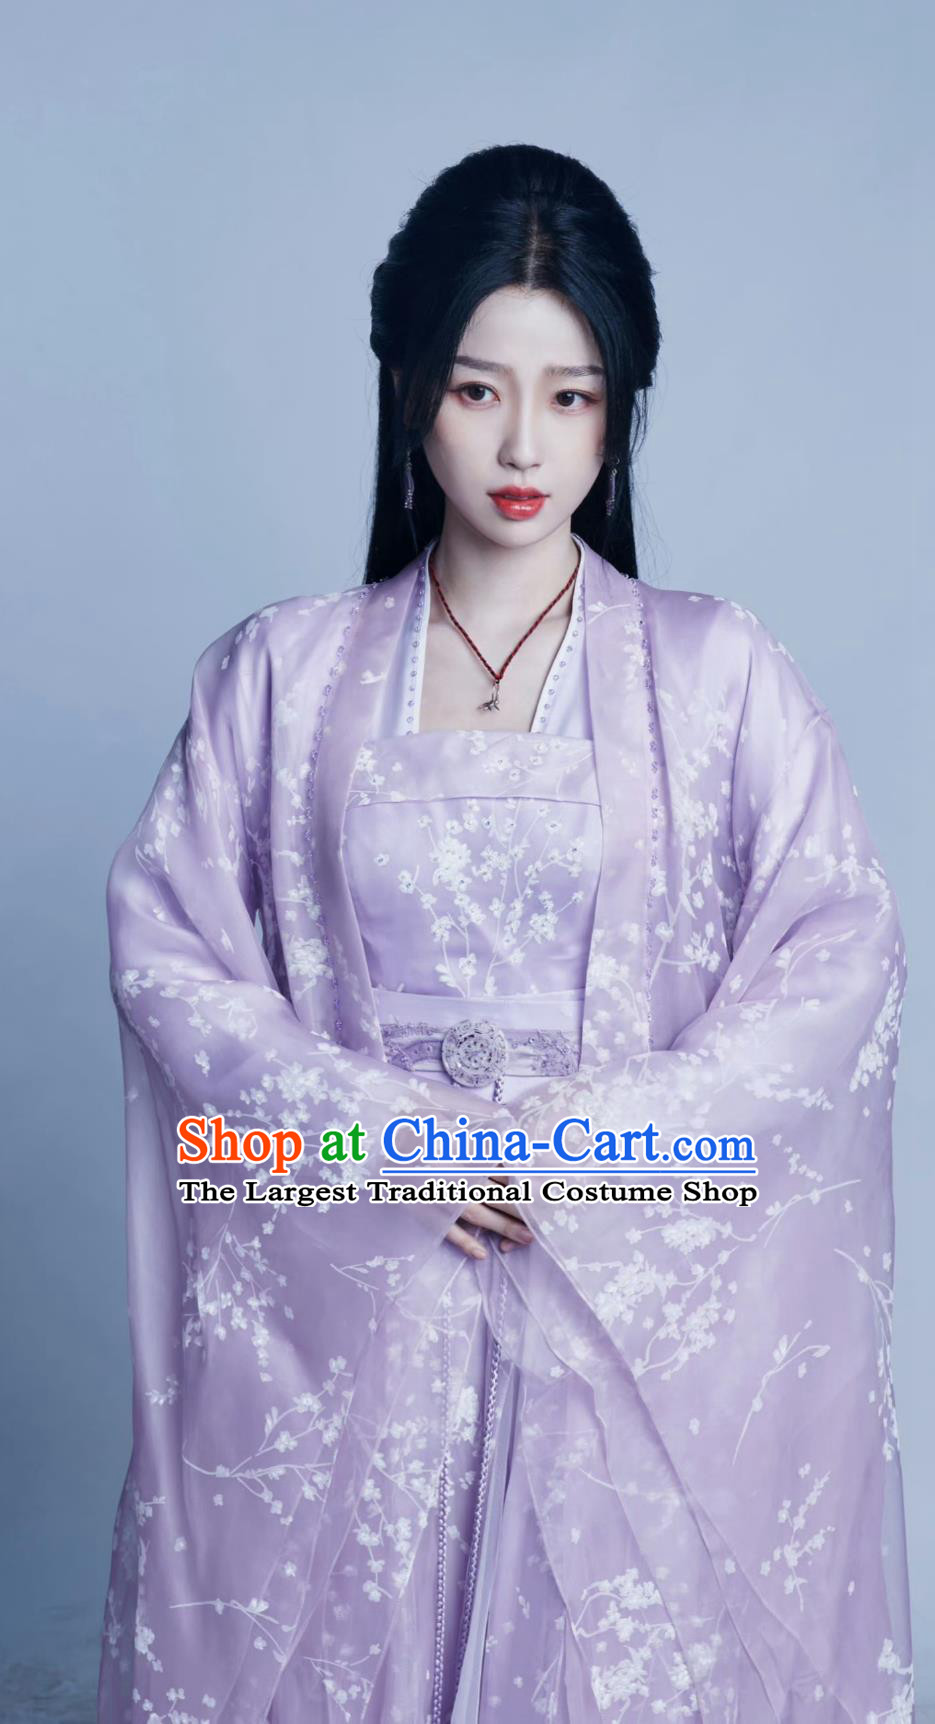 China Ancient Noble Lady Lilac Dresses TV Drama My Journey To You Super Heroine Yun Wei Shan Costumes